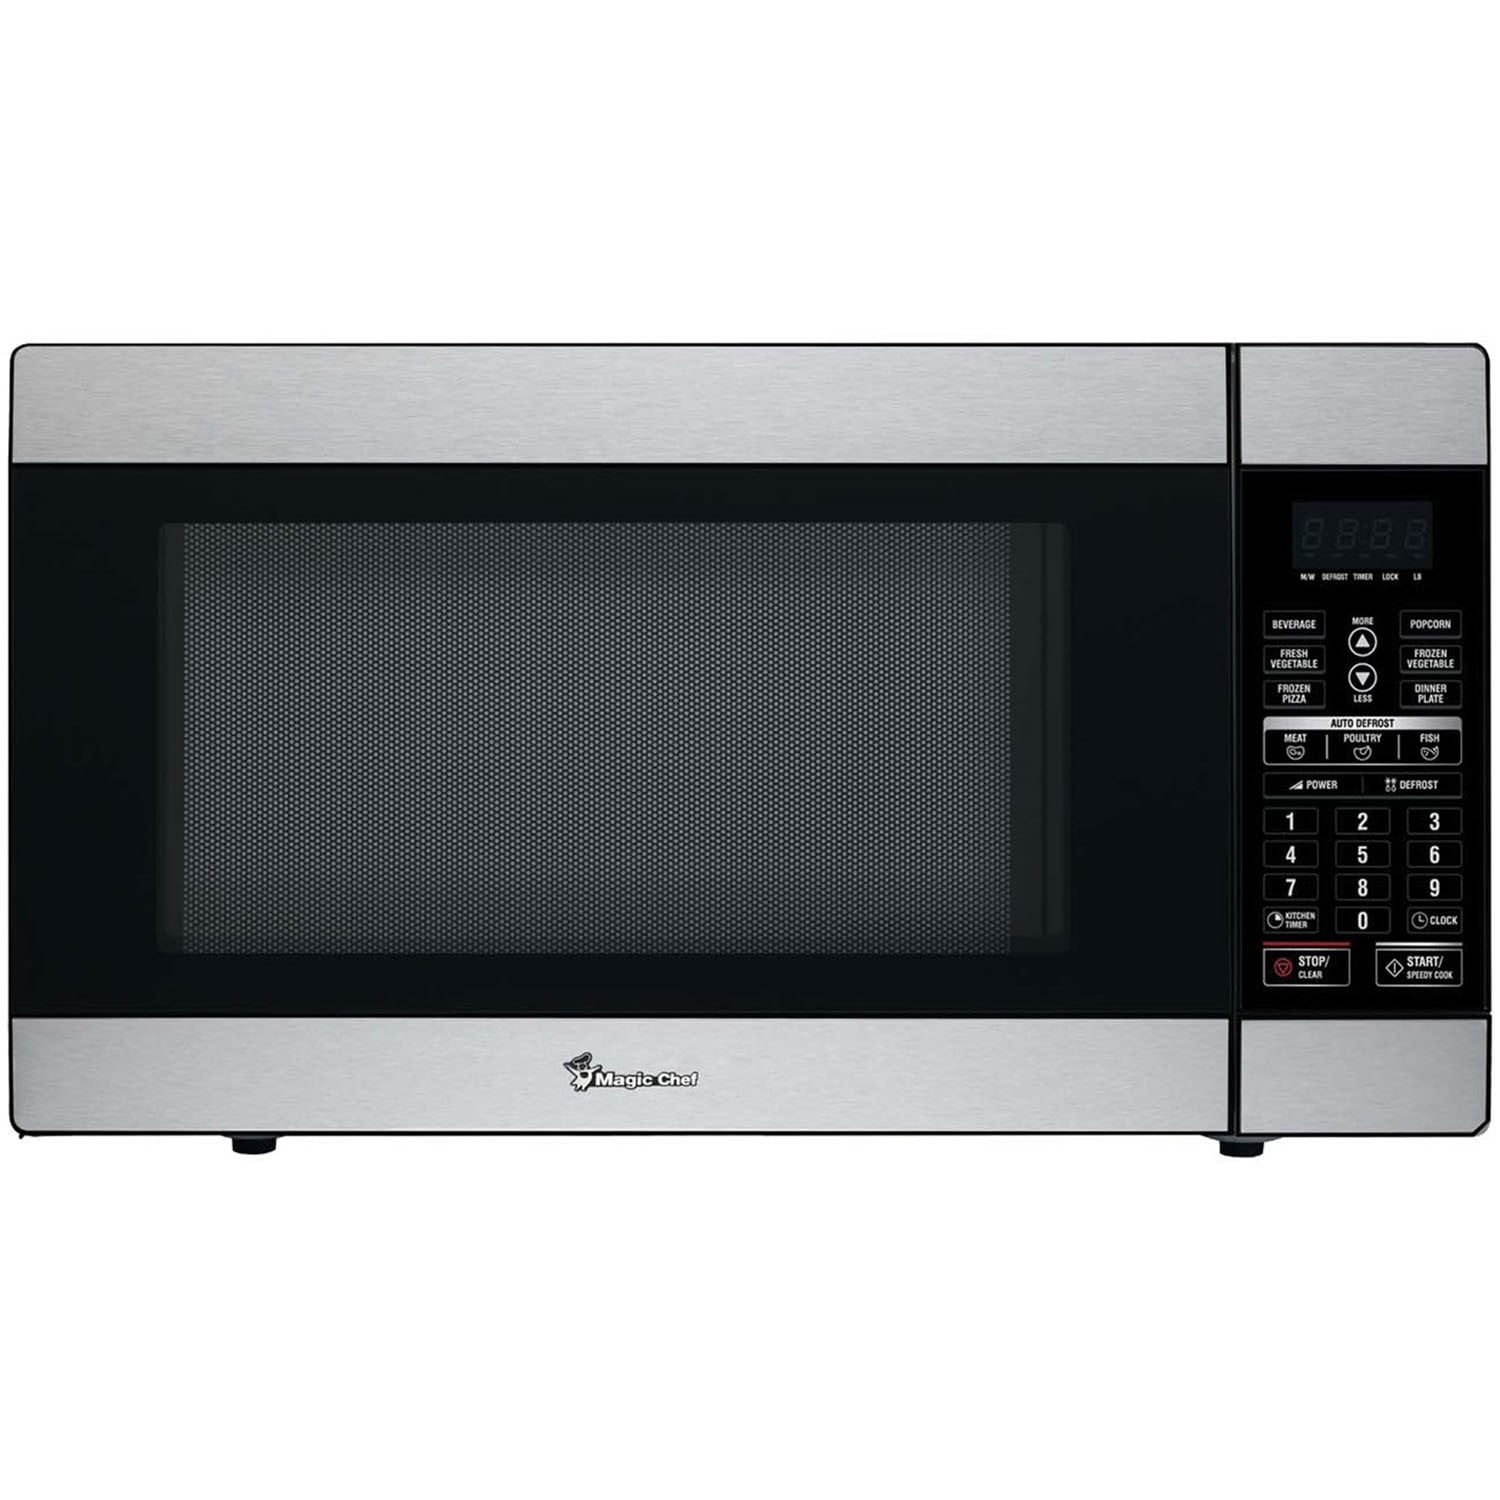 Magic Chef Mcd1811st 1 8 Cu Ft 1100w Countertop Microwave Oven